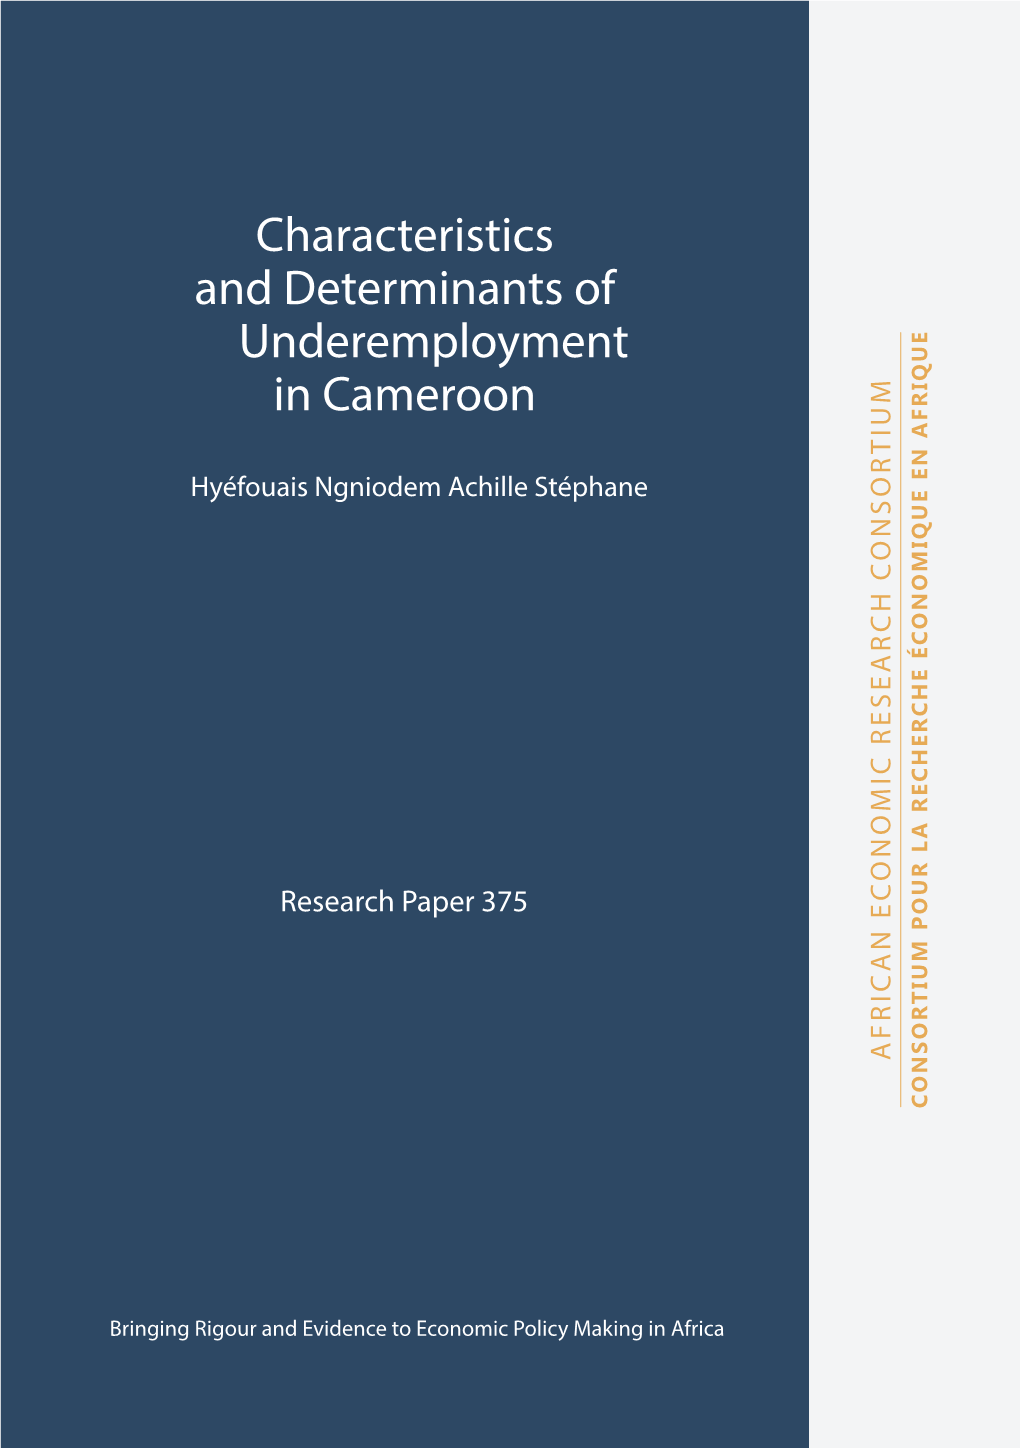 Characteristics and Determinants of Underemployment in Cameroon